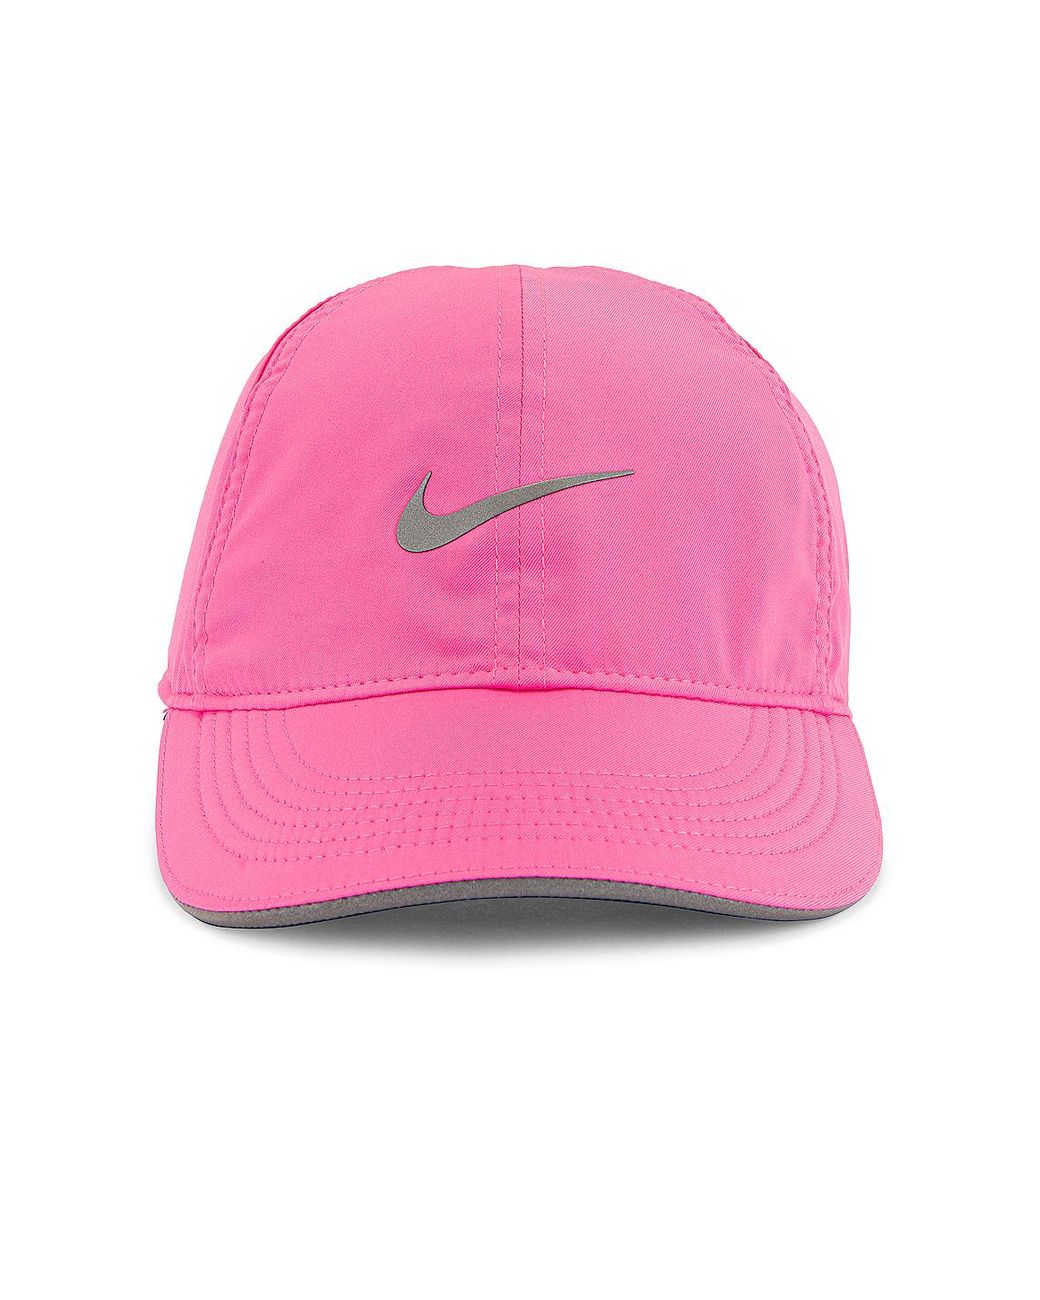 Nike Dry Aerobill Featherlight Cap in Pink | Lyst